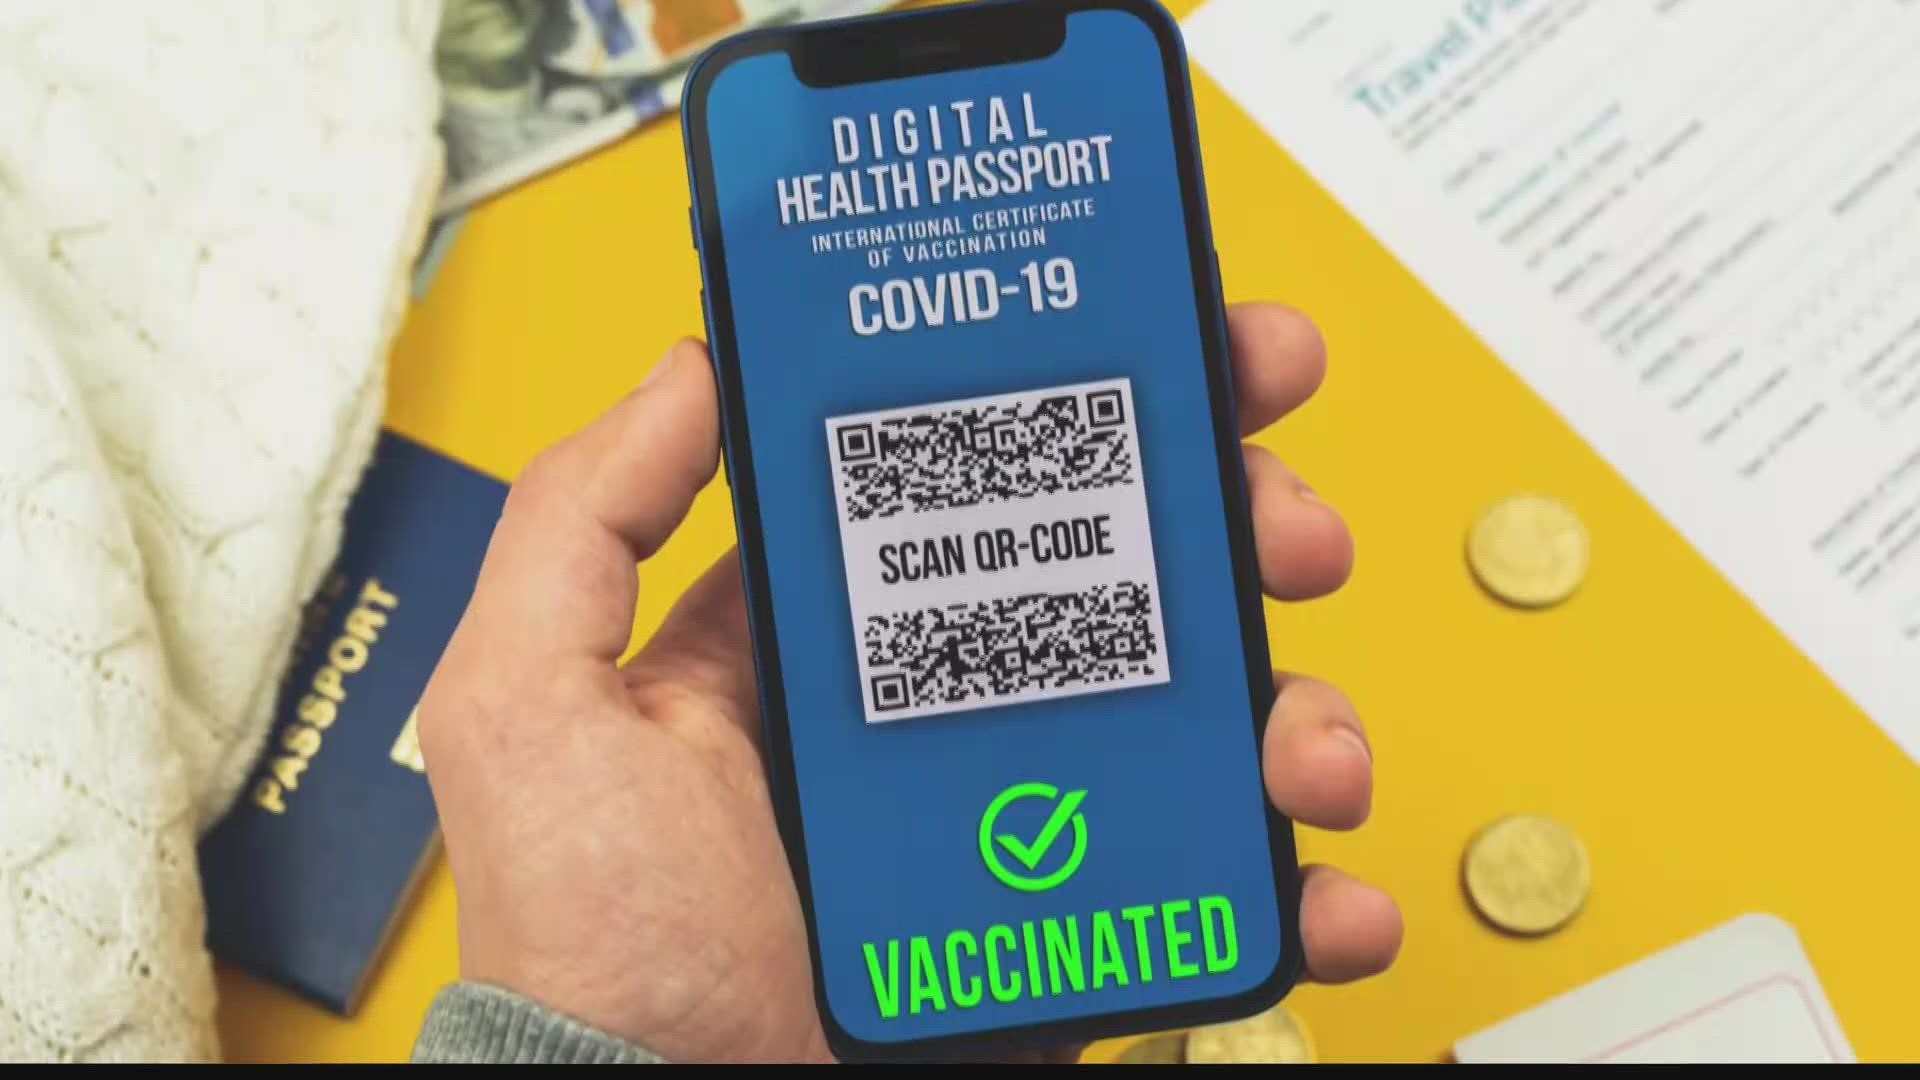 Nearly two years into the coronavirus pandemic and the Florida Department of Health is cracking down on businesses trying to enforce COVID-19 vaccine mandates.